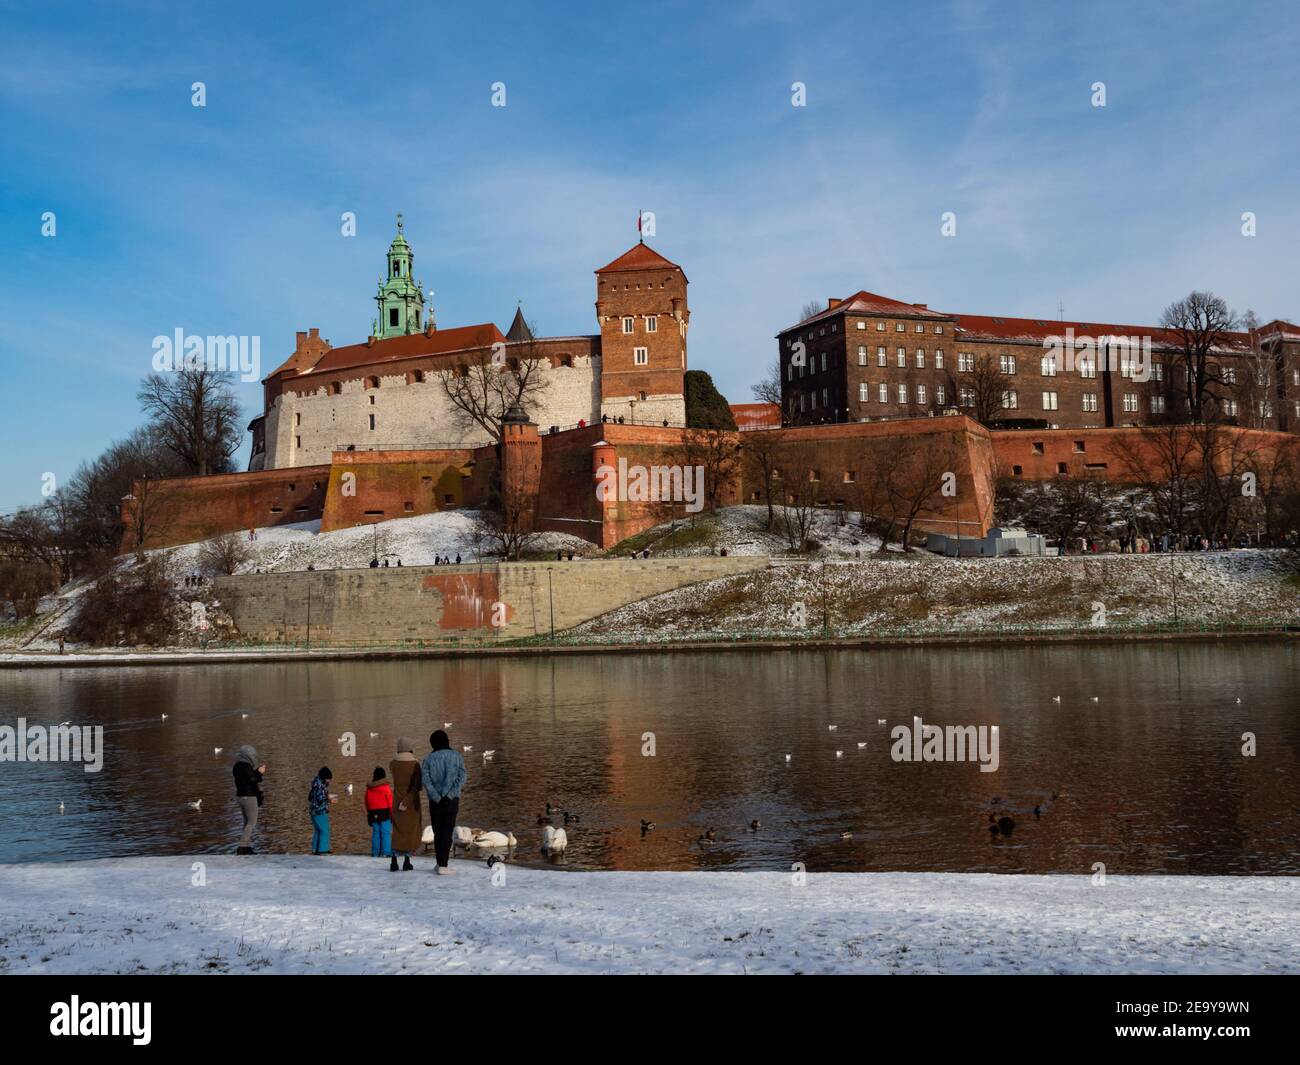 31/01/2021 - Poland/Cracow - view over Vistula River and Wawel Castle, the biggest attraction of Cracow. Winter time and people feeding swans. Stock Photo